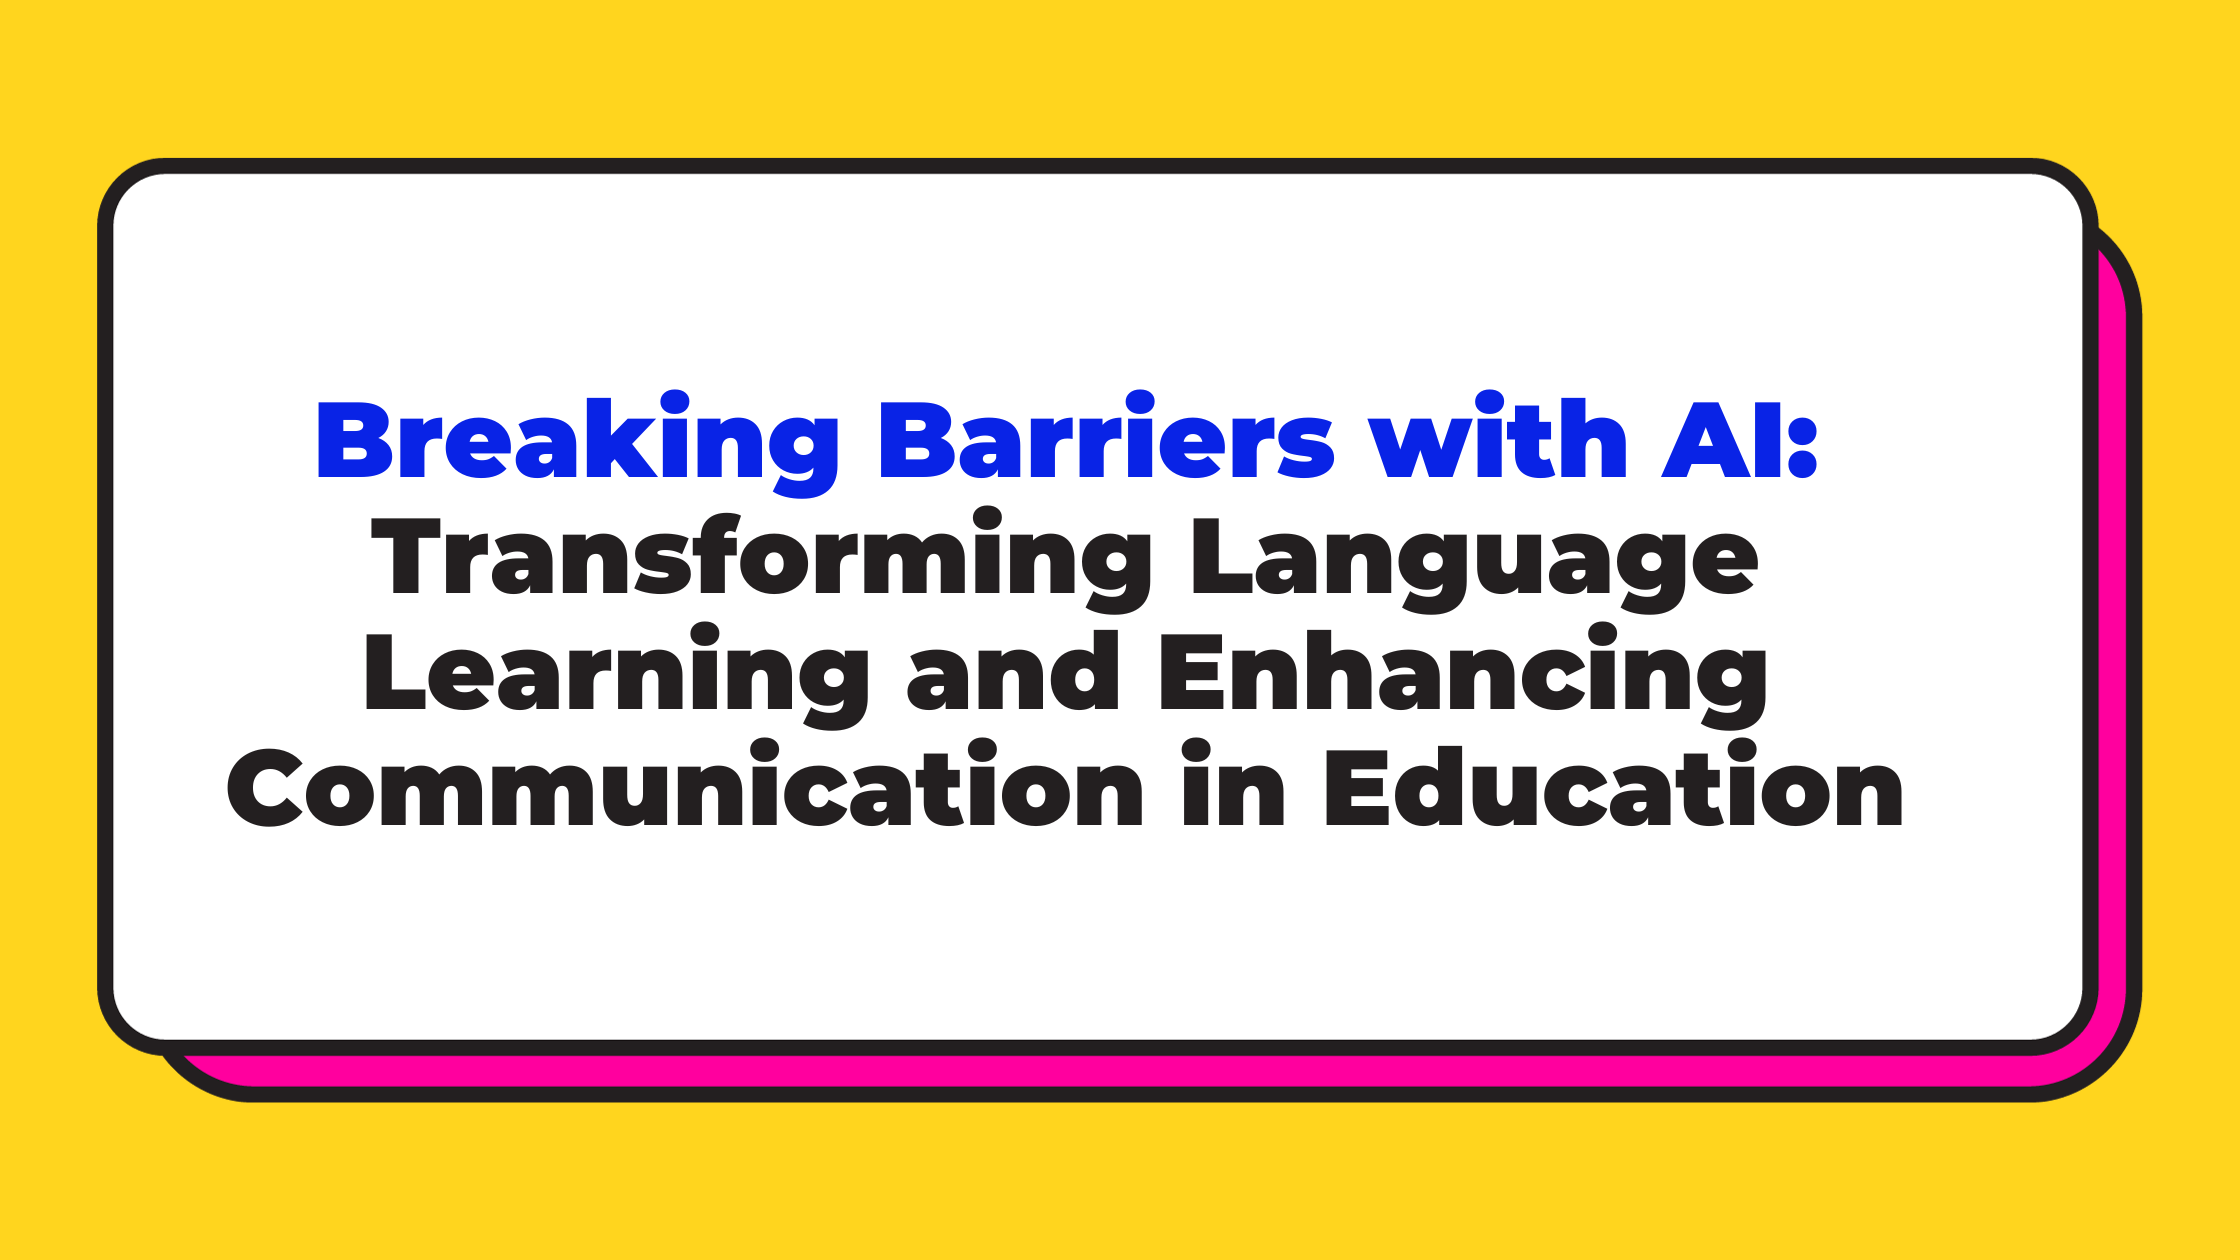 Breaking Barriers with AI: Transforming Language Learning and Enhancing Communication in Education